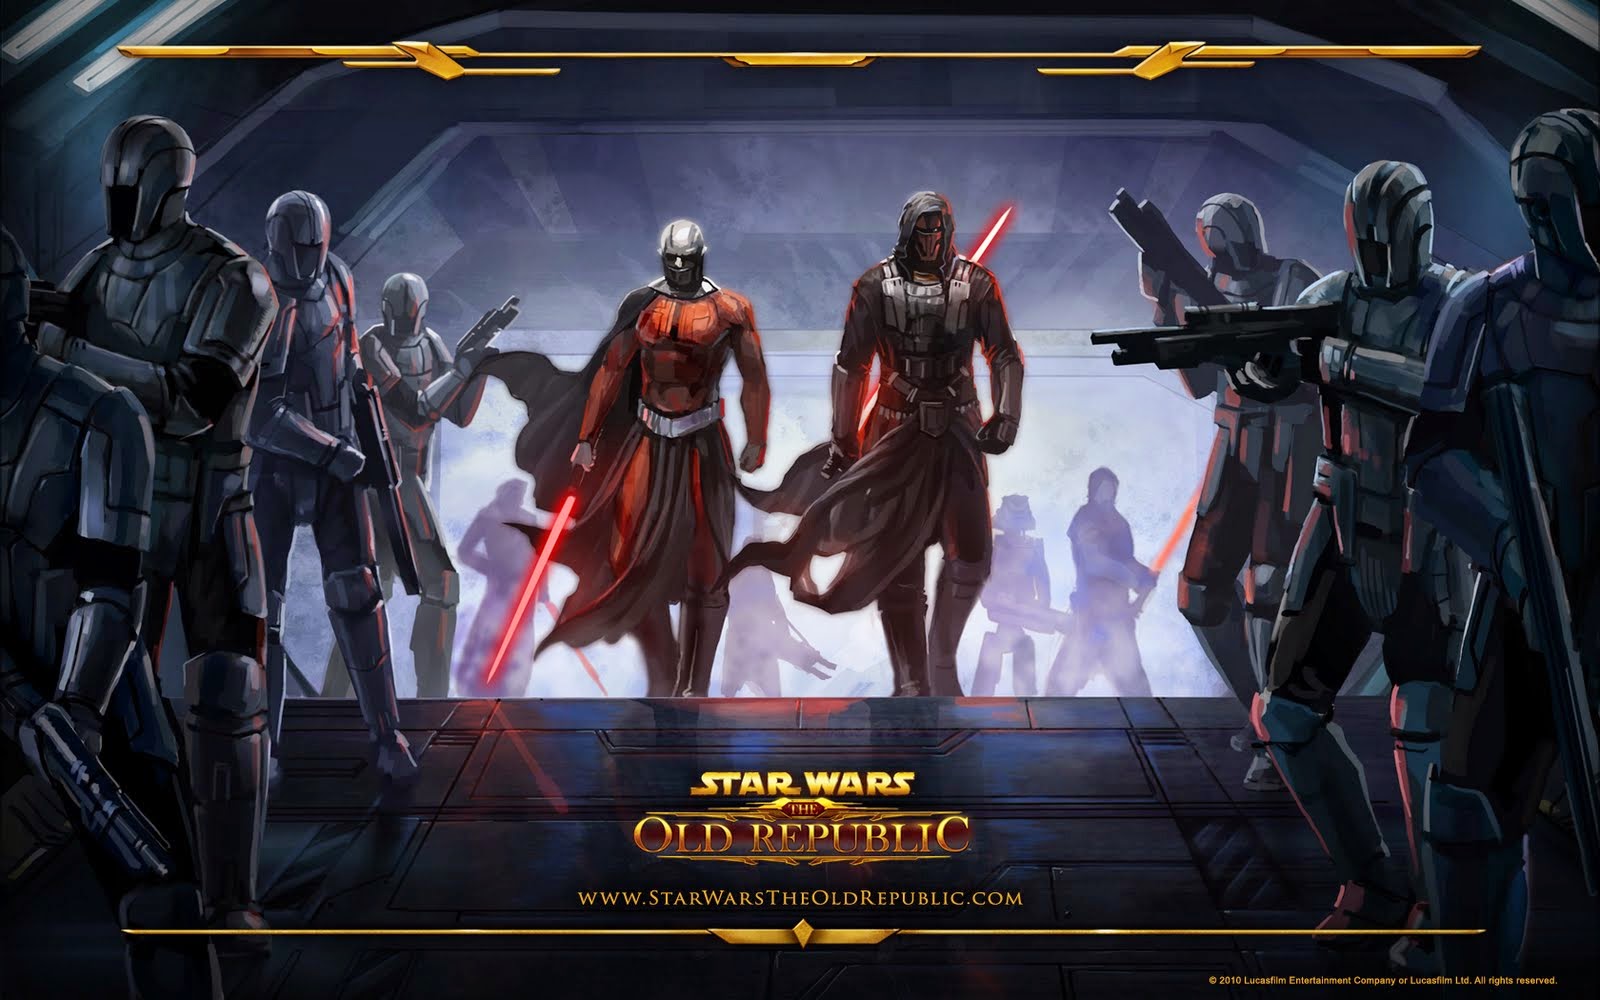 star-wars-knights-of-the-old-republic-wallpaper-star-wars-knights-of-the-old-republic-now-available-for-android-users